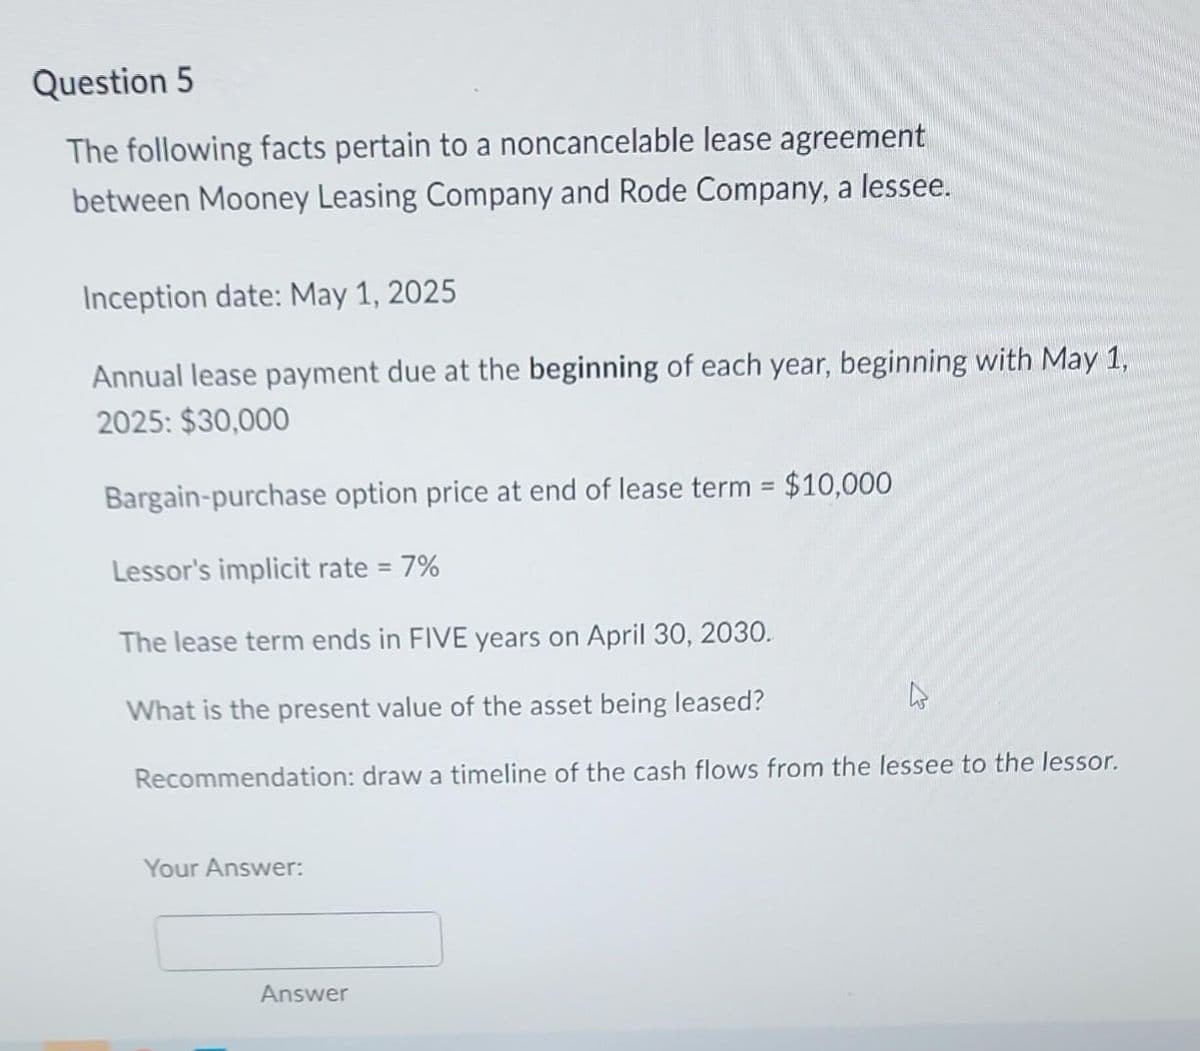 Question 5
The following facts pertain to a noncancelable lease agreement
between Mooney Leasing Company and Rode Company, a lessee.
Inception date: May 1, 2025
Annual lease payment due at the beginning of each year, beginning with May 1,
2025: $30,000
Bargain-purchase option price at end of lease term = $10,000
Lessor's implicit rate = 7%
The lease term ends in FIVE years on April 30, 2030.
What is the present value of the asset being leased?
Recommendation: draw a timeline of the cash flows from the lessee to the lessor.
Your Answer:
Answer